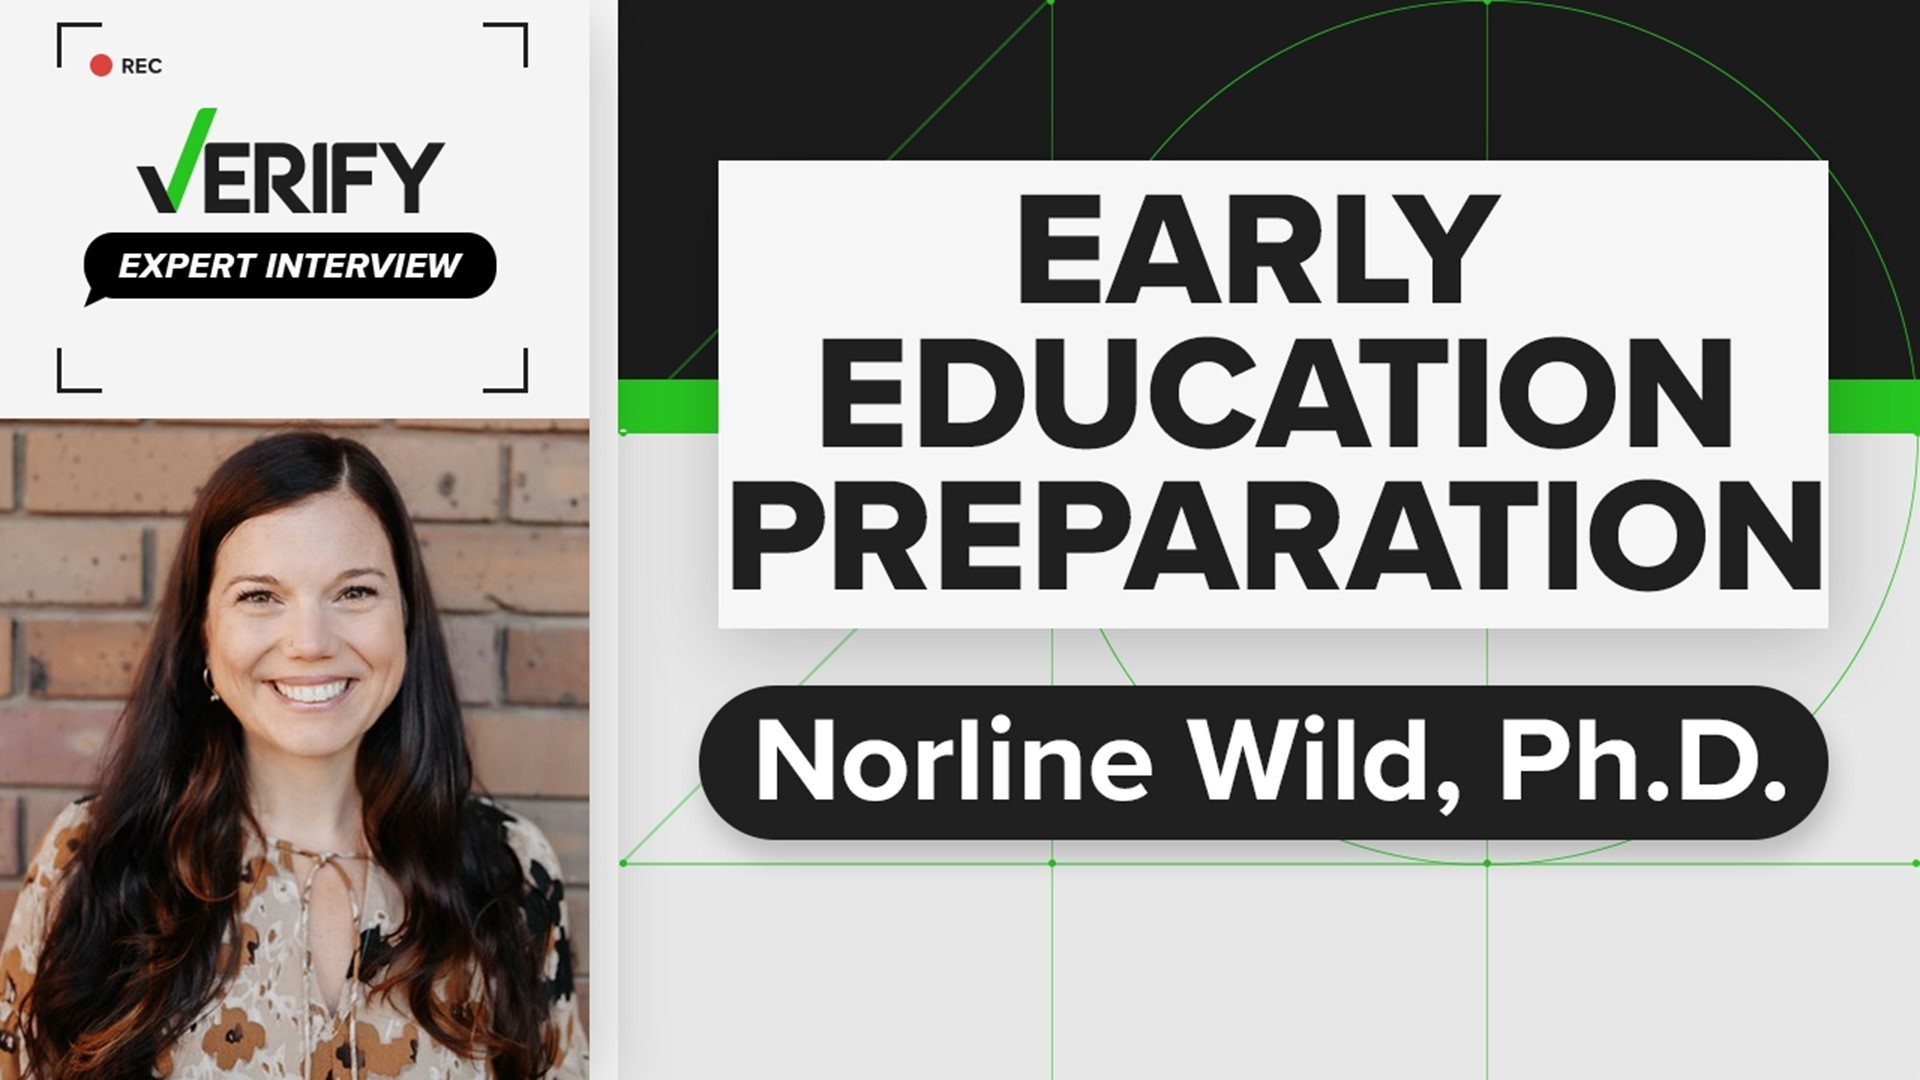 Norline Wild, Ph.D. of Niagara University discusses ways both parents and educators can prepare young children for their educational careers.